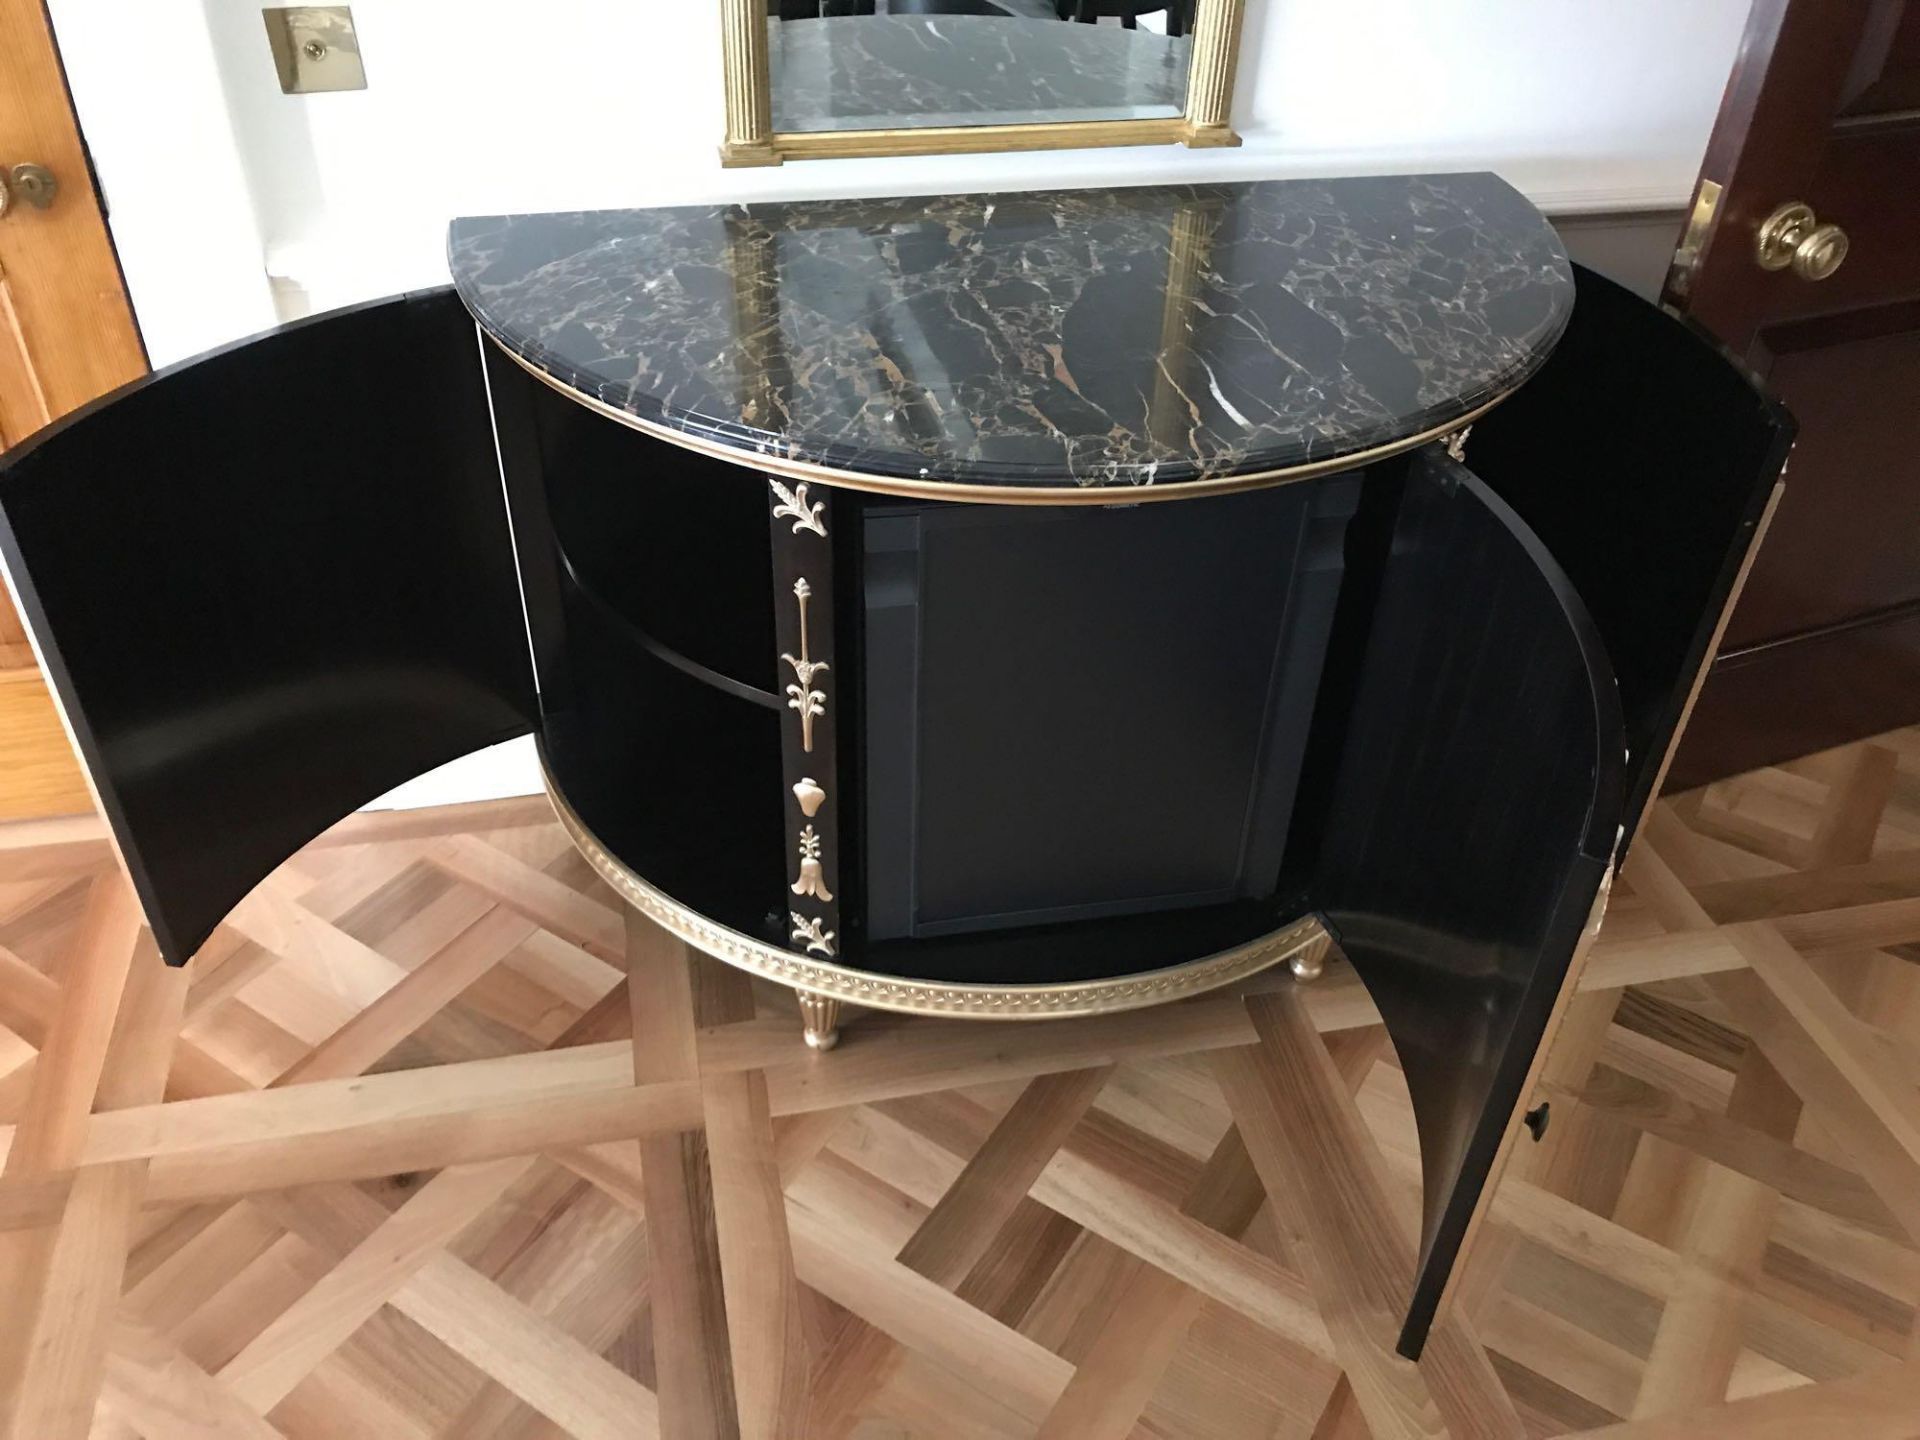 Black Lacquer Hand Decorated Chinoiserie Serpentine Commode By Restall Brown And Clennell The Unit - Image 2 of 2